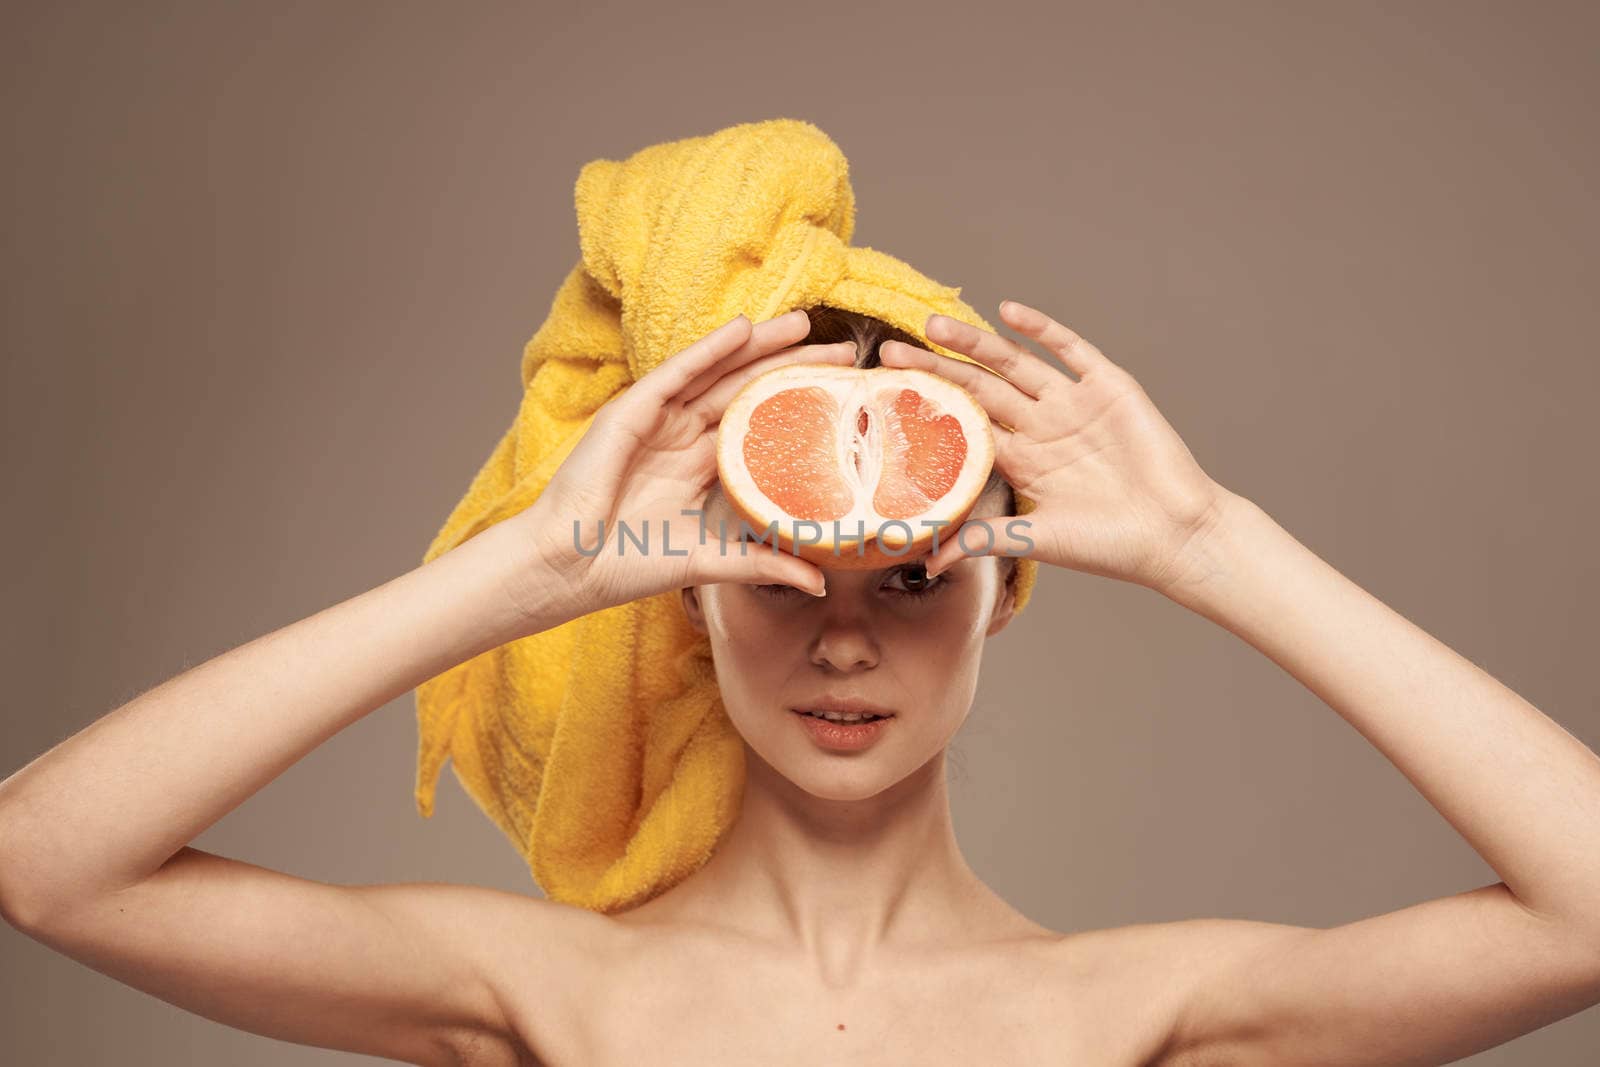 woman with grapefruit in hands naked shoulders and skin care vitamins by SHOTPRIME